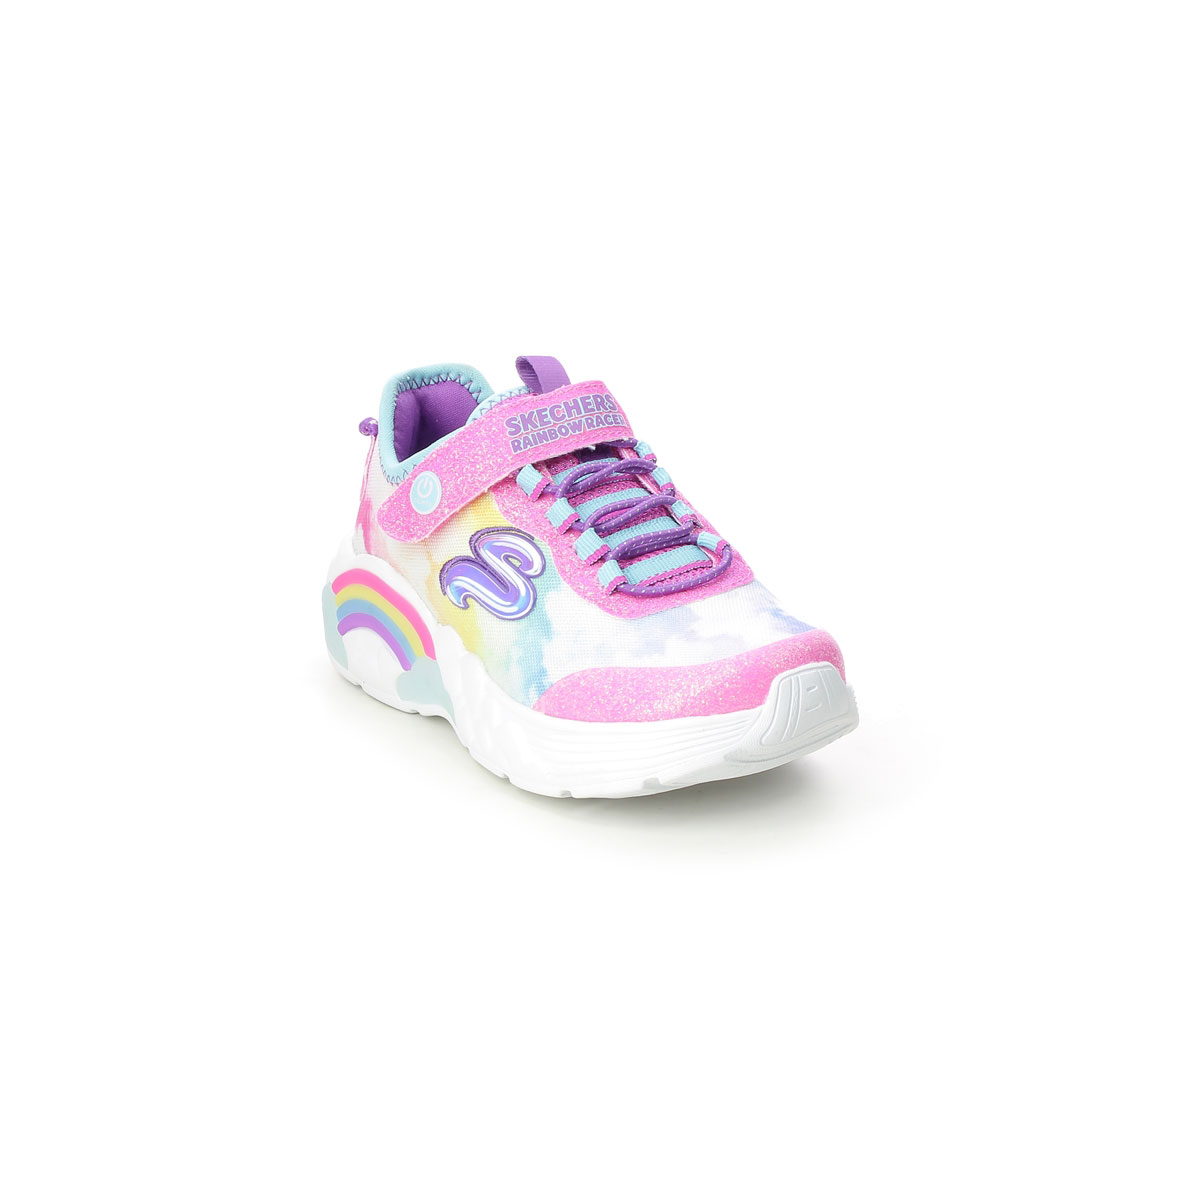 Skechers Rainbow Racer Pink Kids Girls Trainers 302300L In Size 29 In Plain Pink For kids